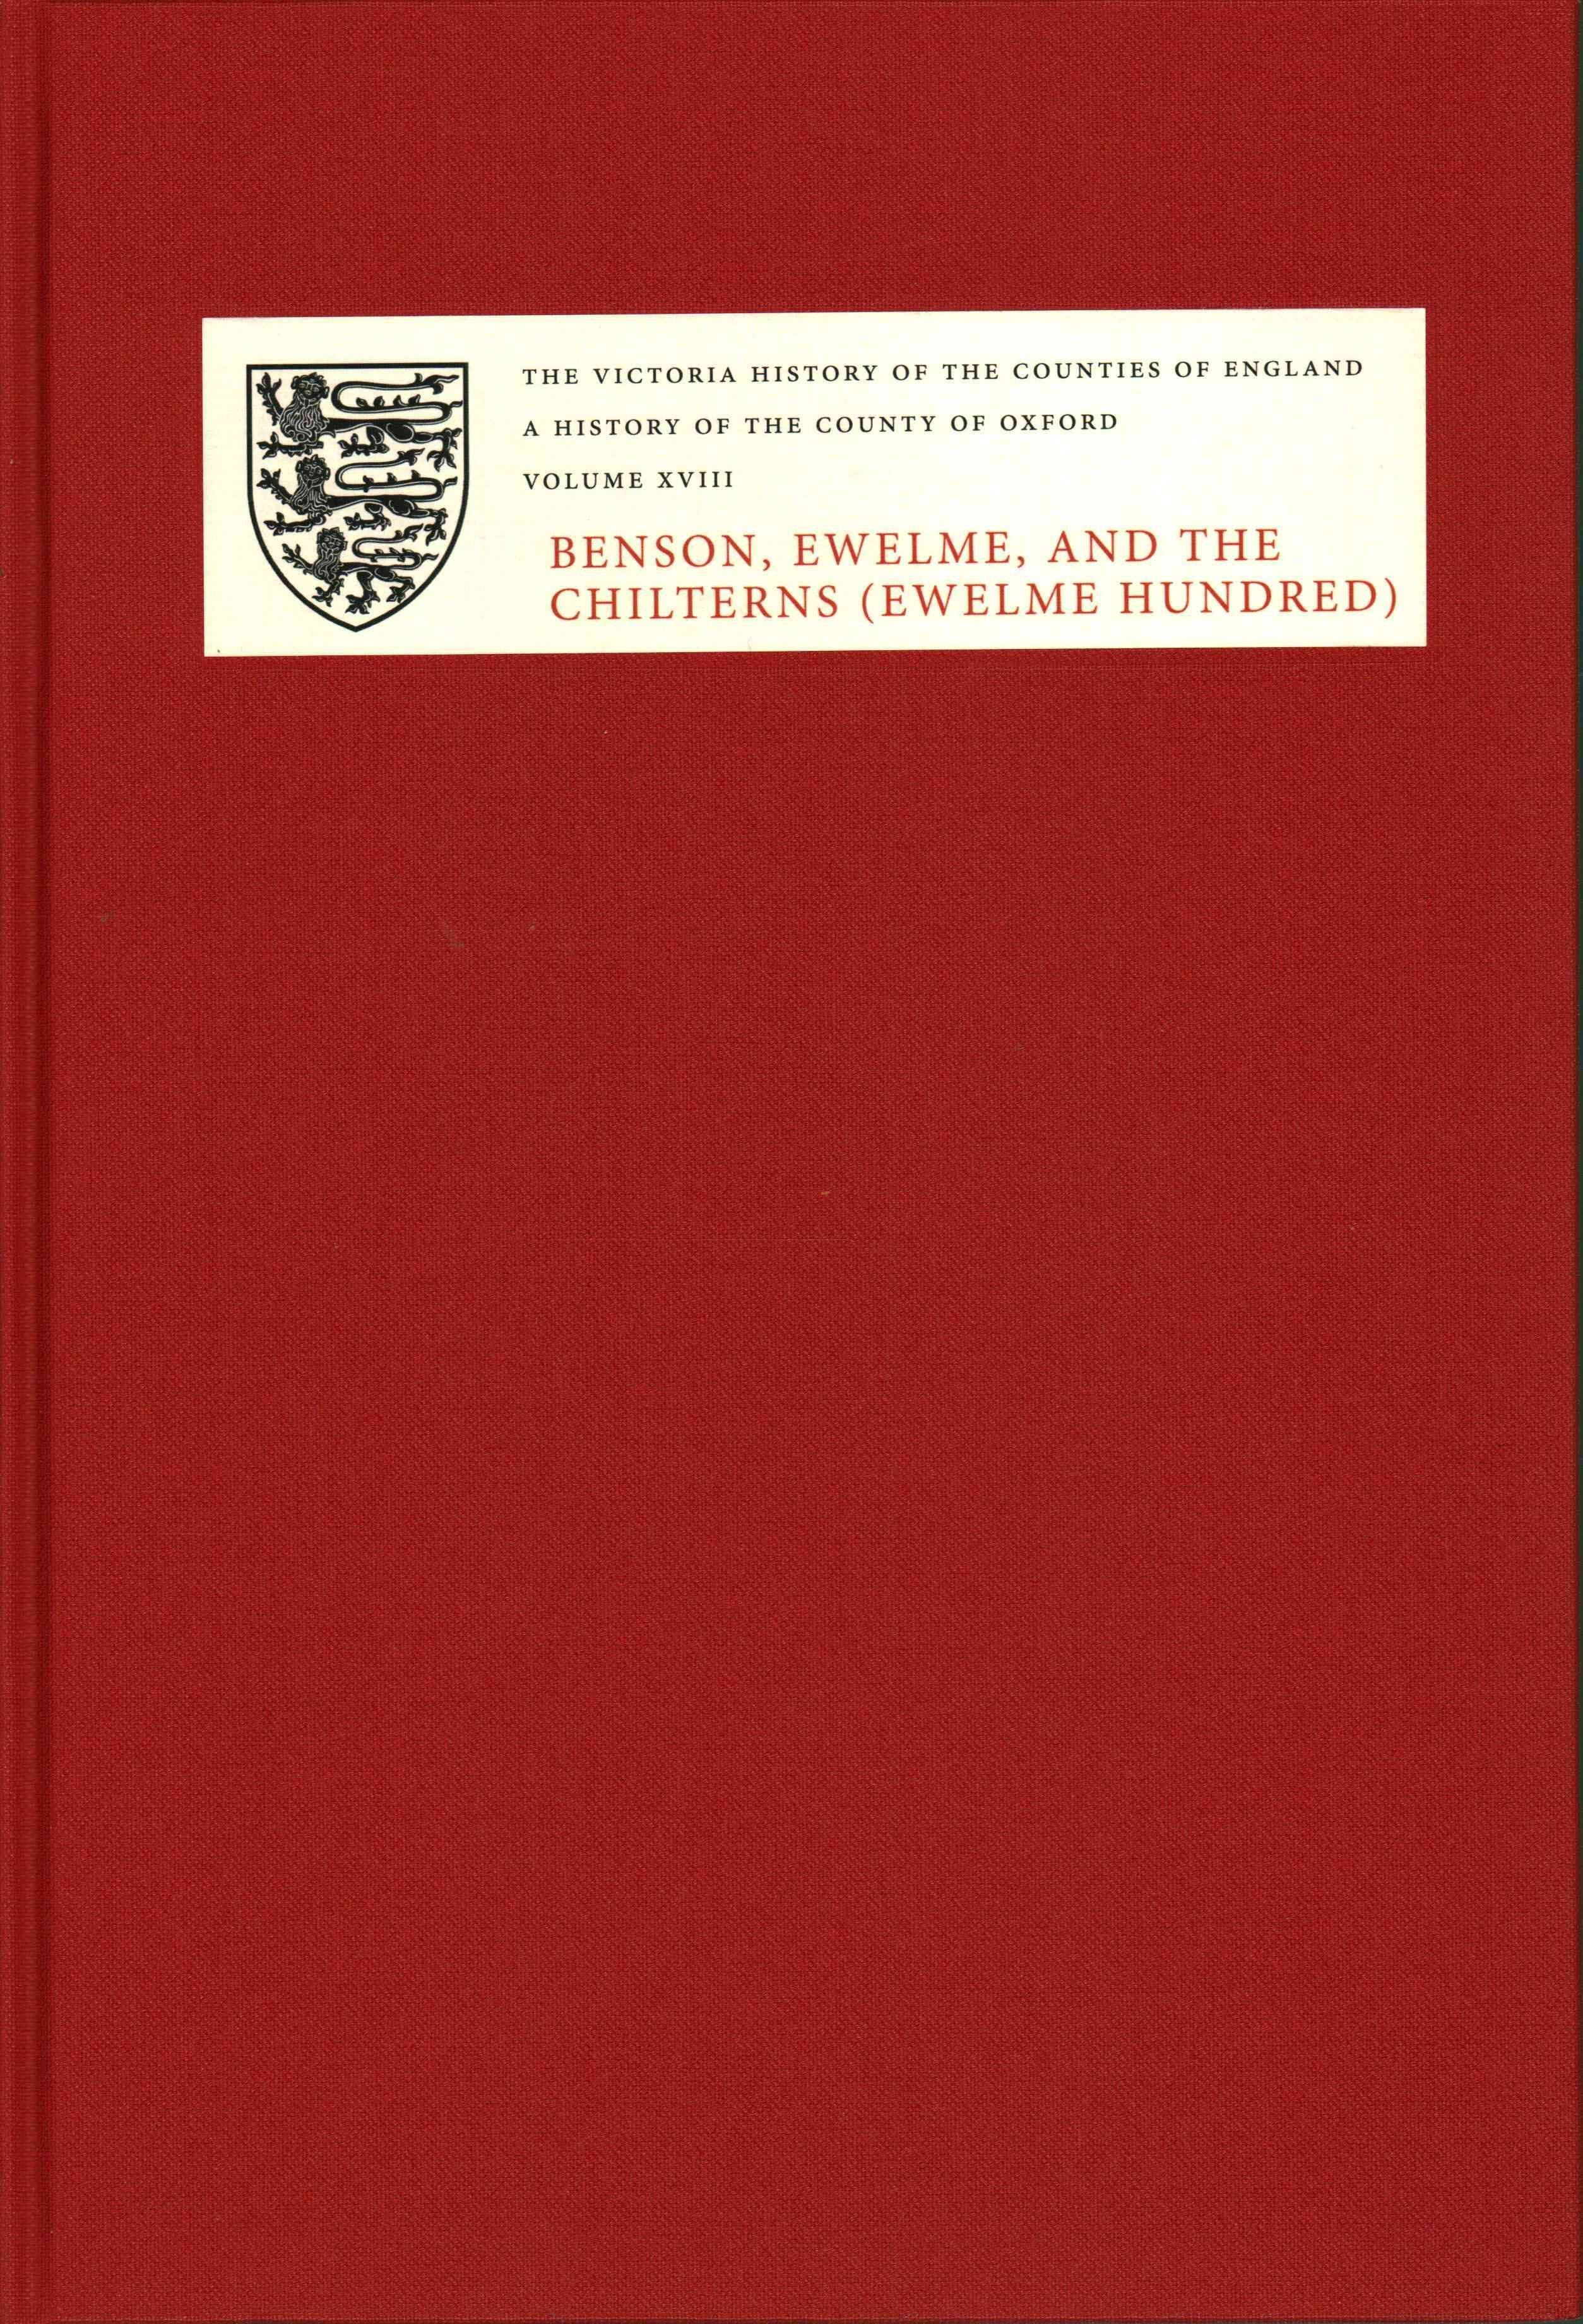 A History of the County of Oxford - XVIII: Benson, Ewelme and the Chilterns (Ewelme Hundred)